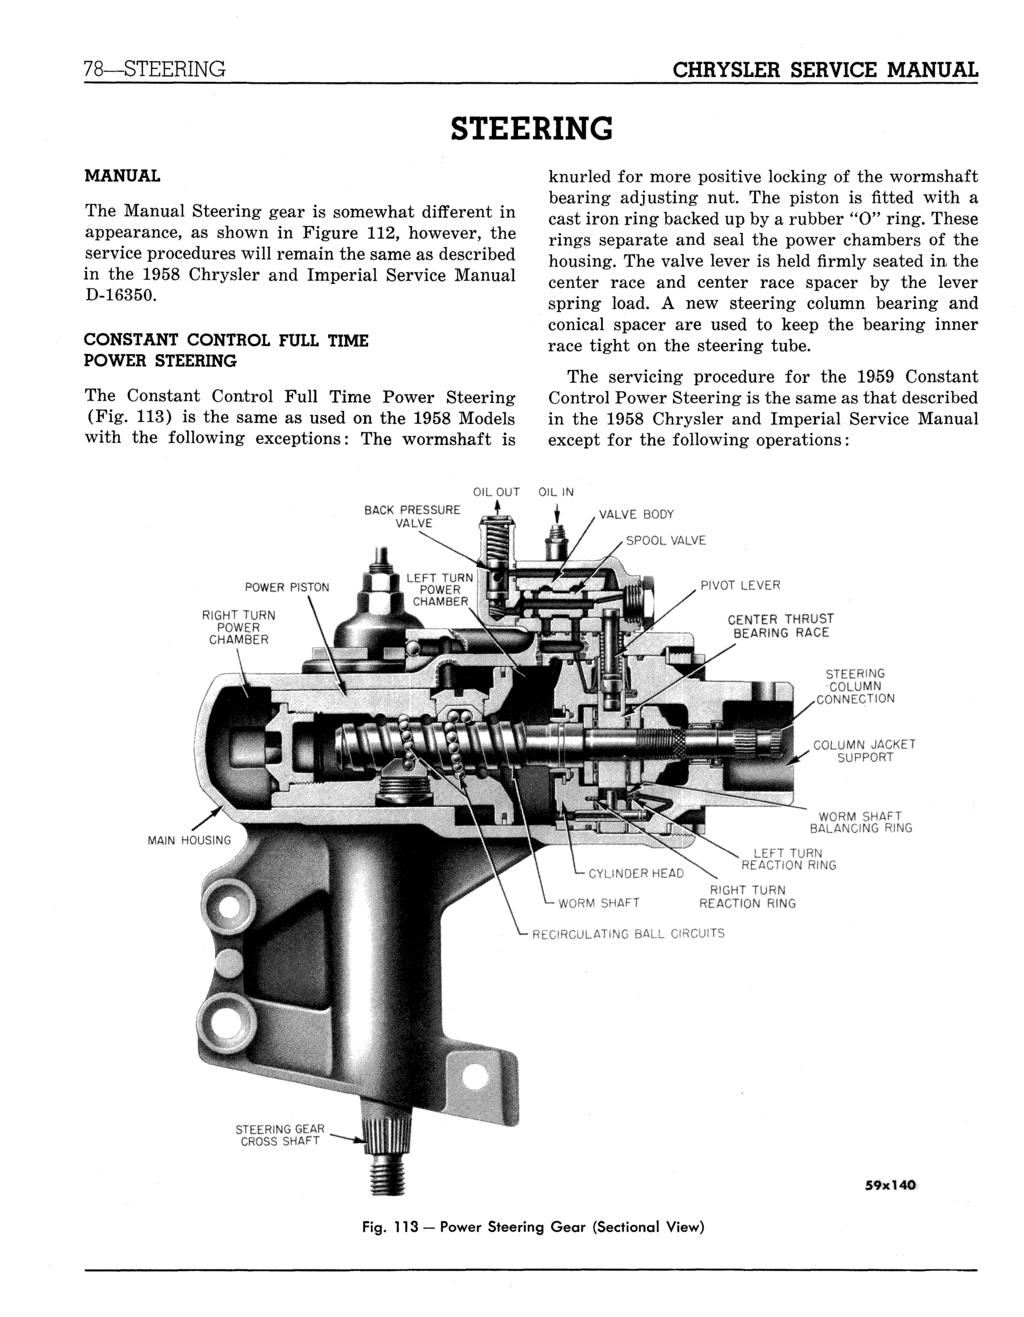 78 MANUAL The Manual Steering gear is somewhat different in appearance, as shown in Figure 112, however, the service procedures will remain the same as described in the 1958 Chrysler and Imperial